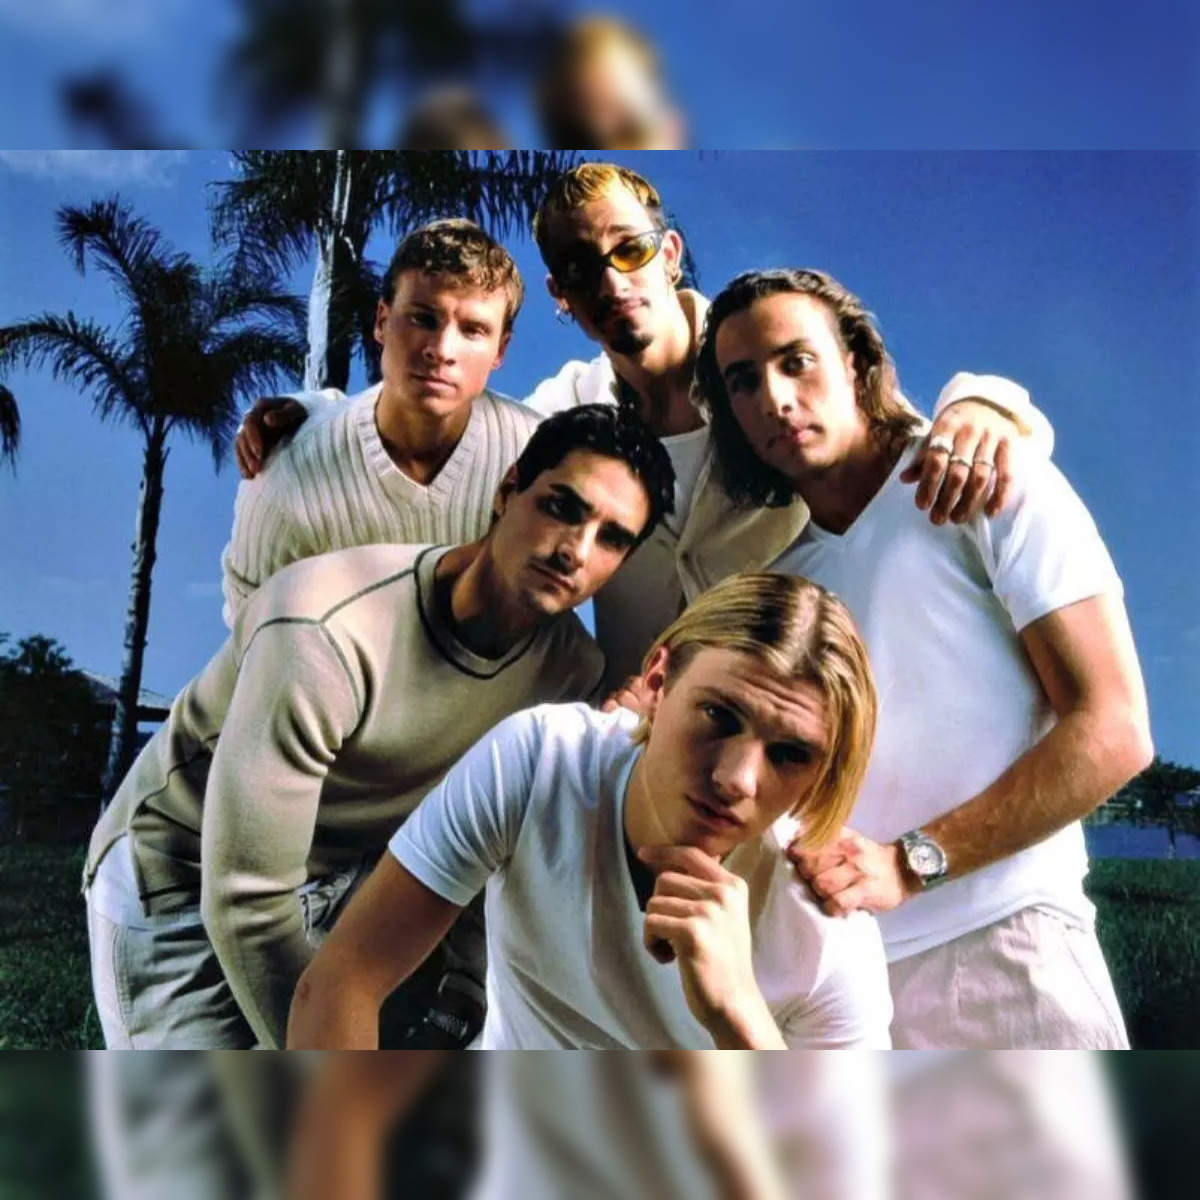 Backstreet Boys - Quit Playing Games (With My Heart) (12” Live Version) 